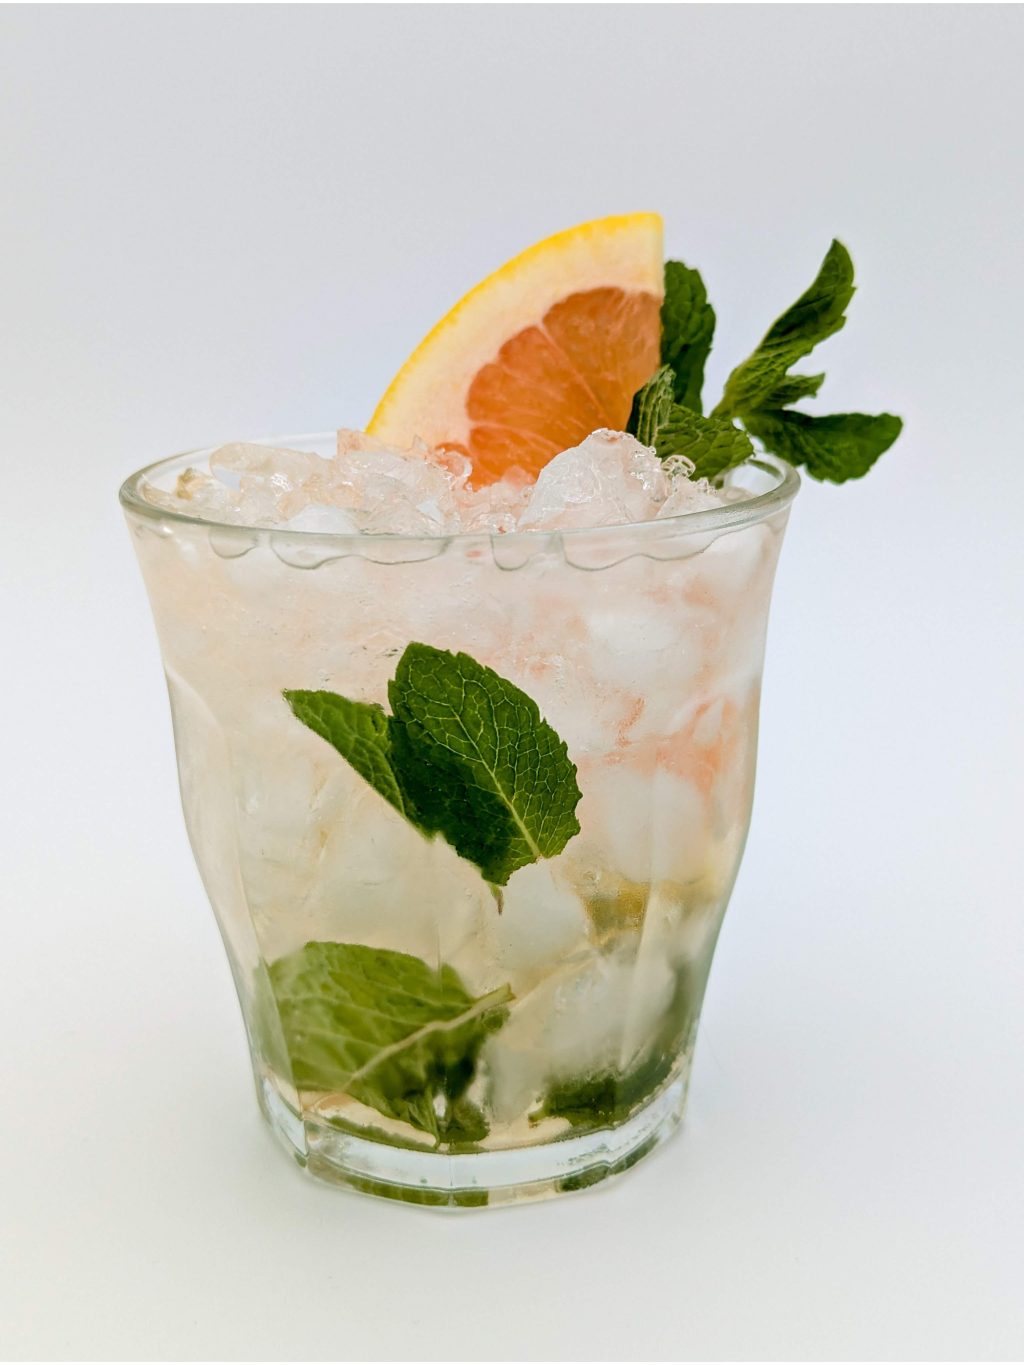 slightly gold liquid and mint leaves in an old fashioned glass filled with crushed ice with a grapefruit slice and mint as garnish